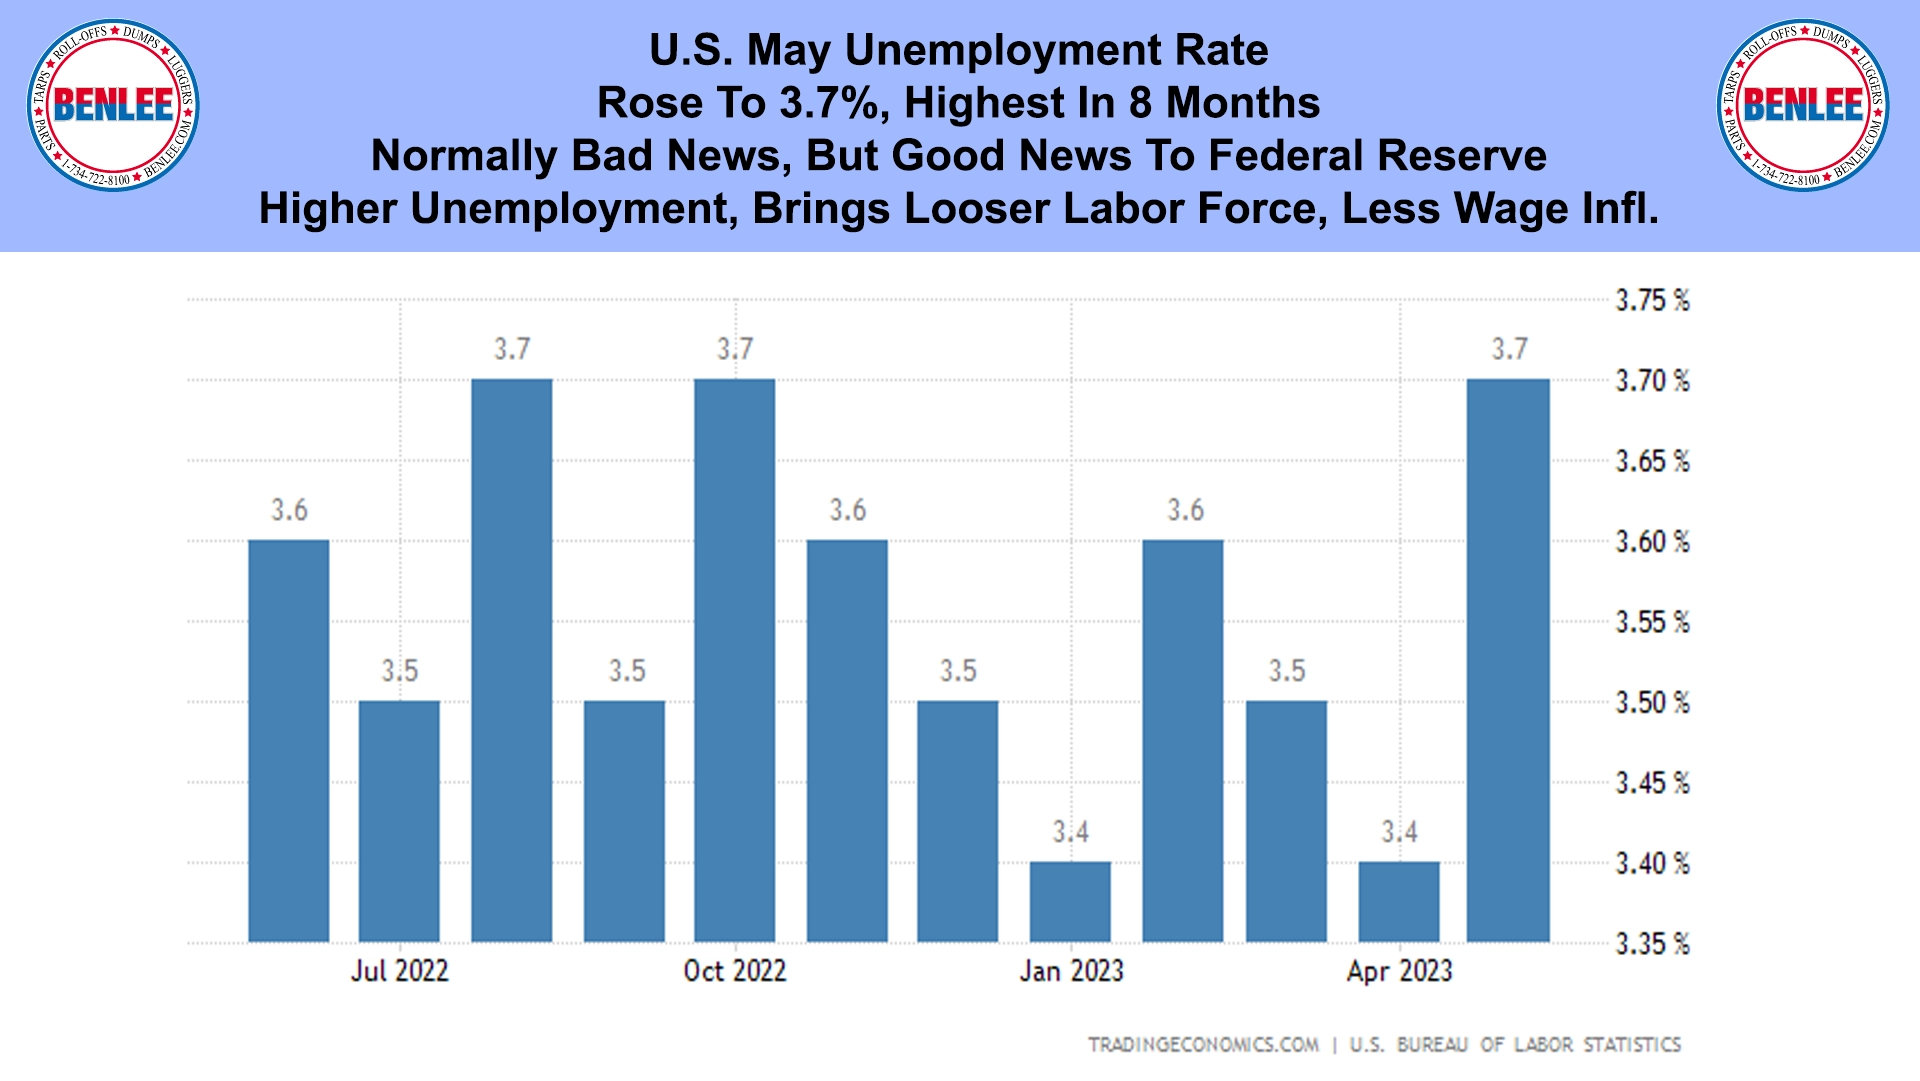 U.S. May Unemployment Rate